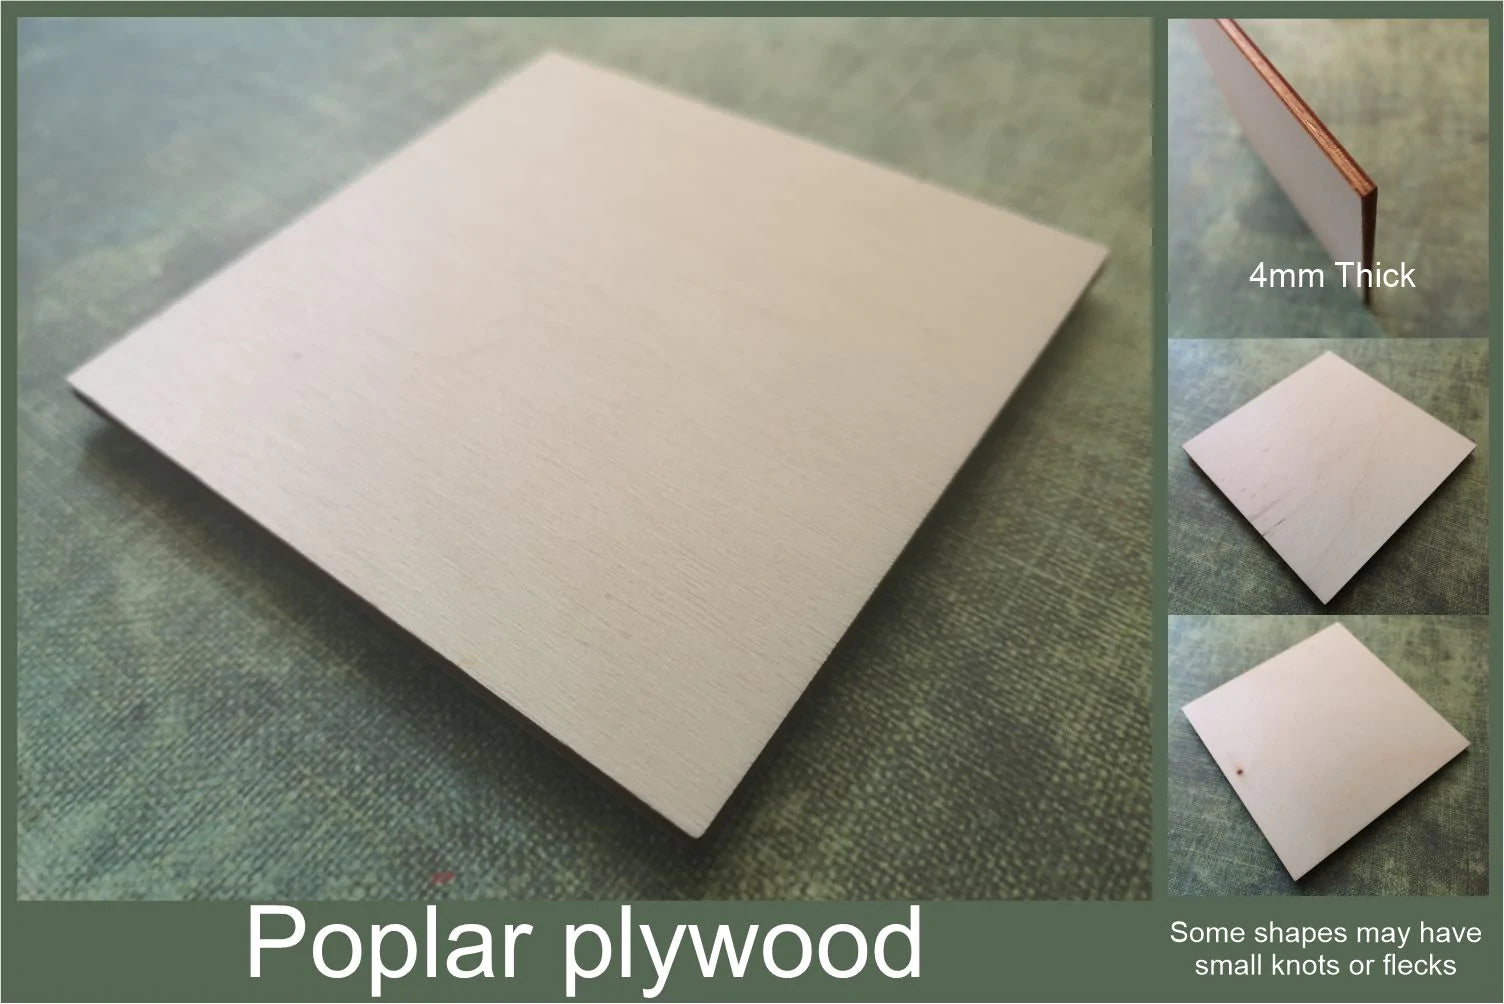 4mm thick poplar plywood used to make the 4x4 cut-outs ready for crafting